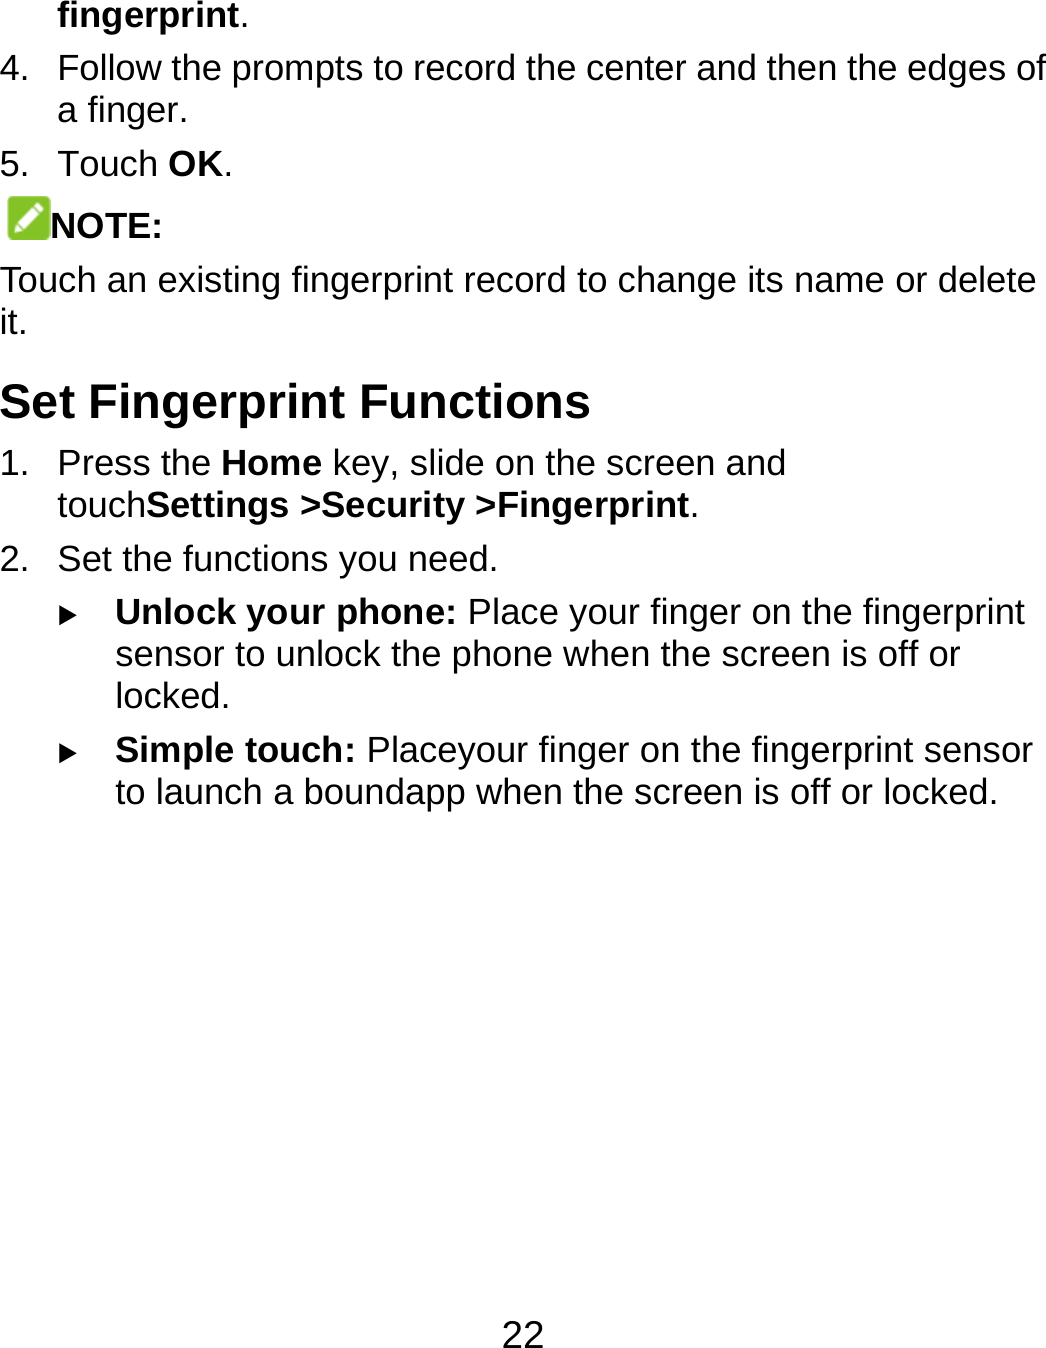  22 fingerprint. 4.  Follow the prompts to record the center and then the edges of a finger. 5. Touch OK. NOTE: Touch an existing fingerprint record to change its name or delete it. Set Fingerprint Functions 1. Press the Home key, slide on the screen and touchSettings &gt;Security &gt;Fingerprint. 2.  Set the functions you need.  Unlock your phone: Place your finger on the fingerprint sensor to unlock the phone when the screen is off or locked.  Simple touch: Placeyour finger on the fingerprint sensor to launch a boundapp when the screen is off or locked.      